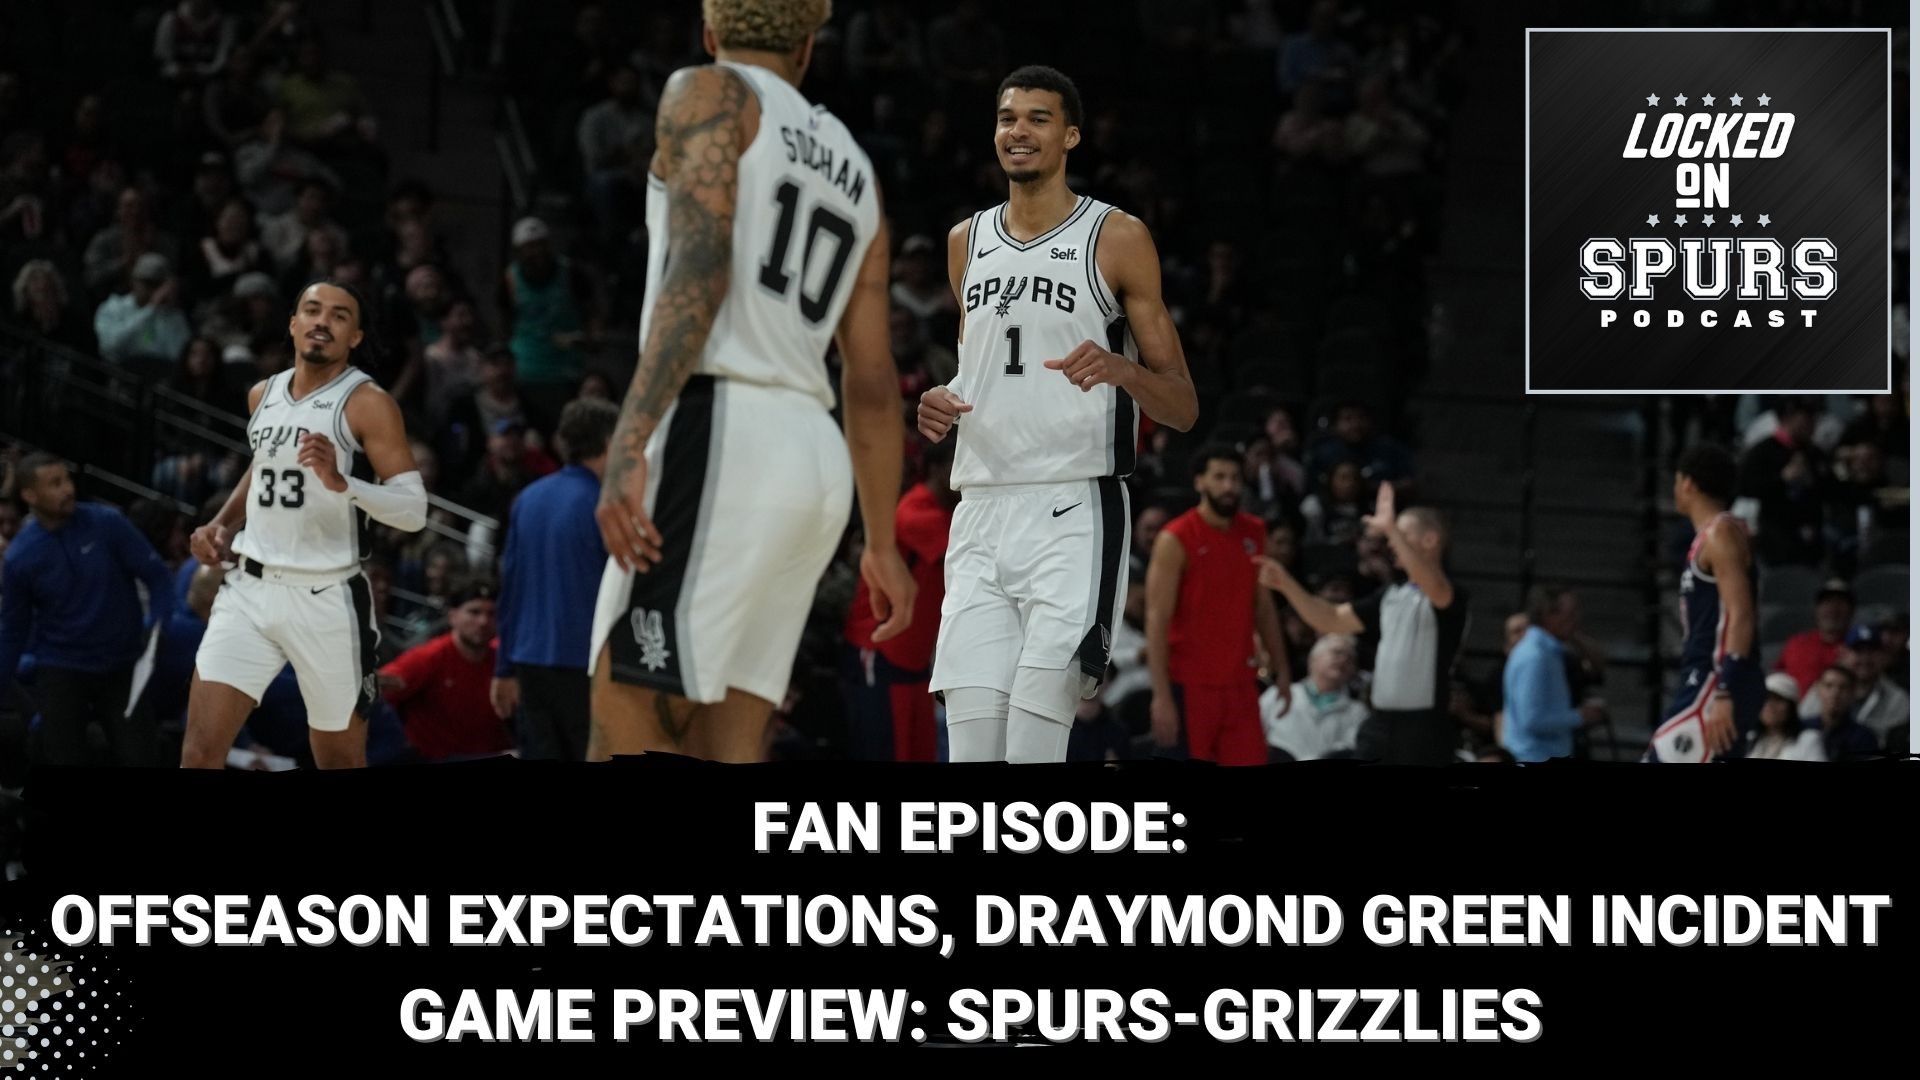 Spurs fans join the show to discuss their favorite NBA team.